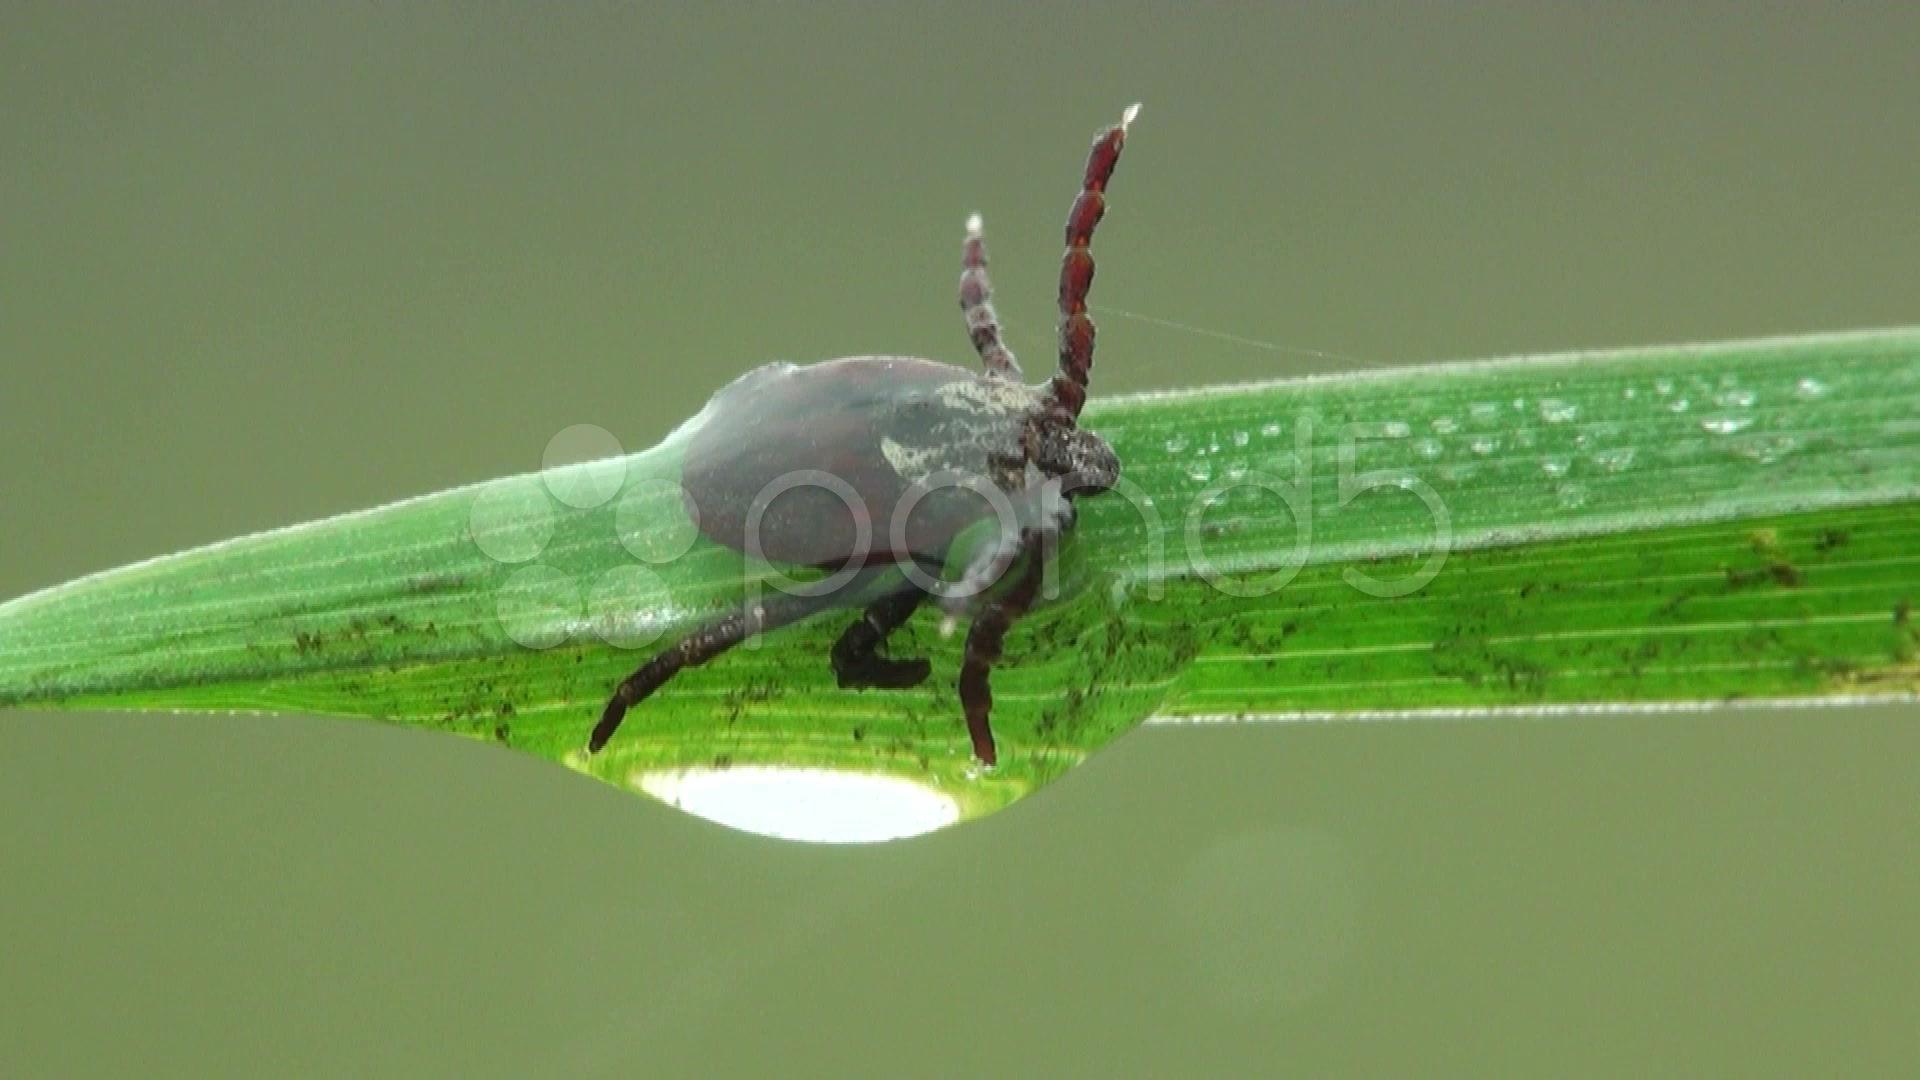 Macro, Mite is sitting on grass ~ Stock Footage #32220628